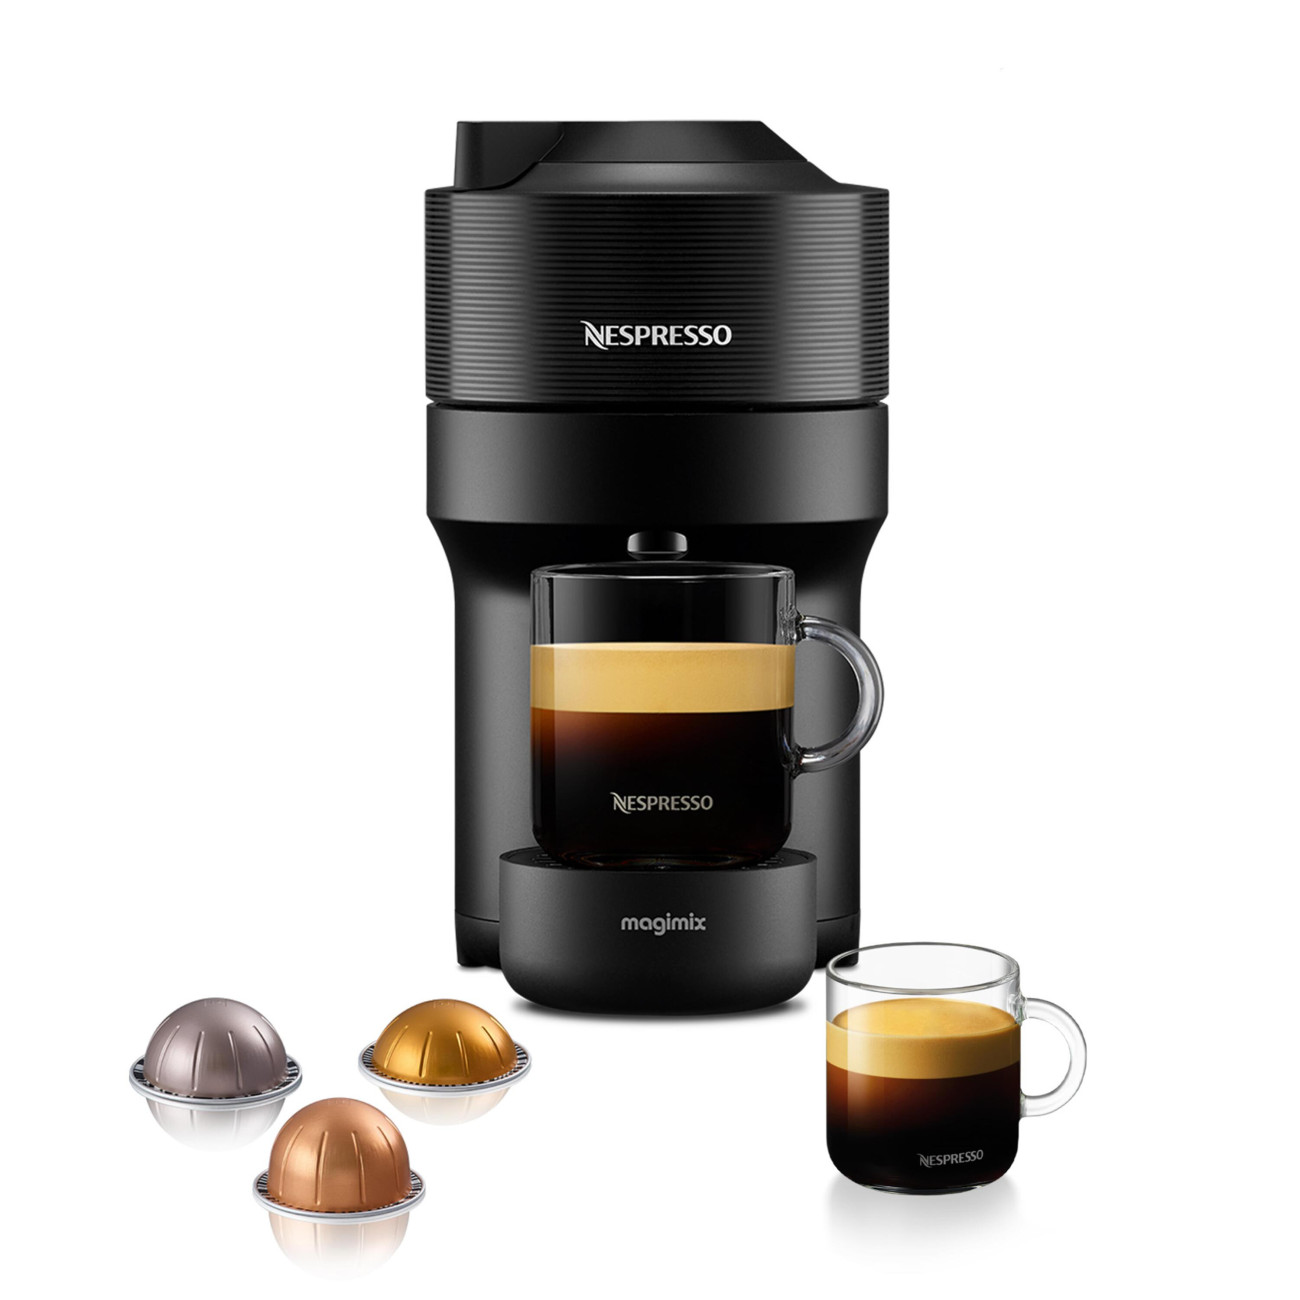 My Nespresso Vertuo Pop serves both caffeine and feel-good color